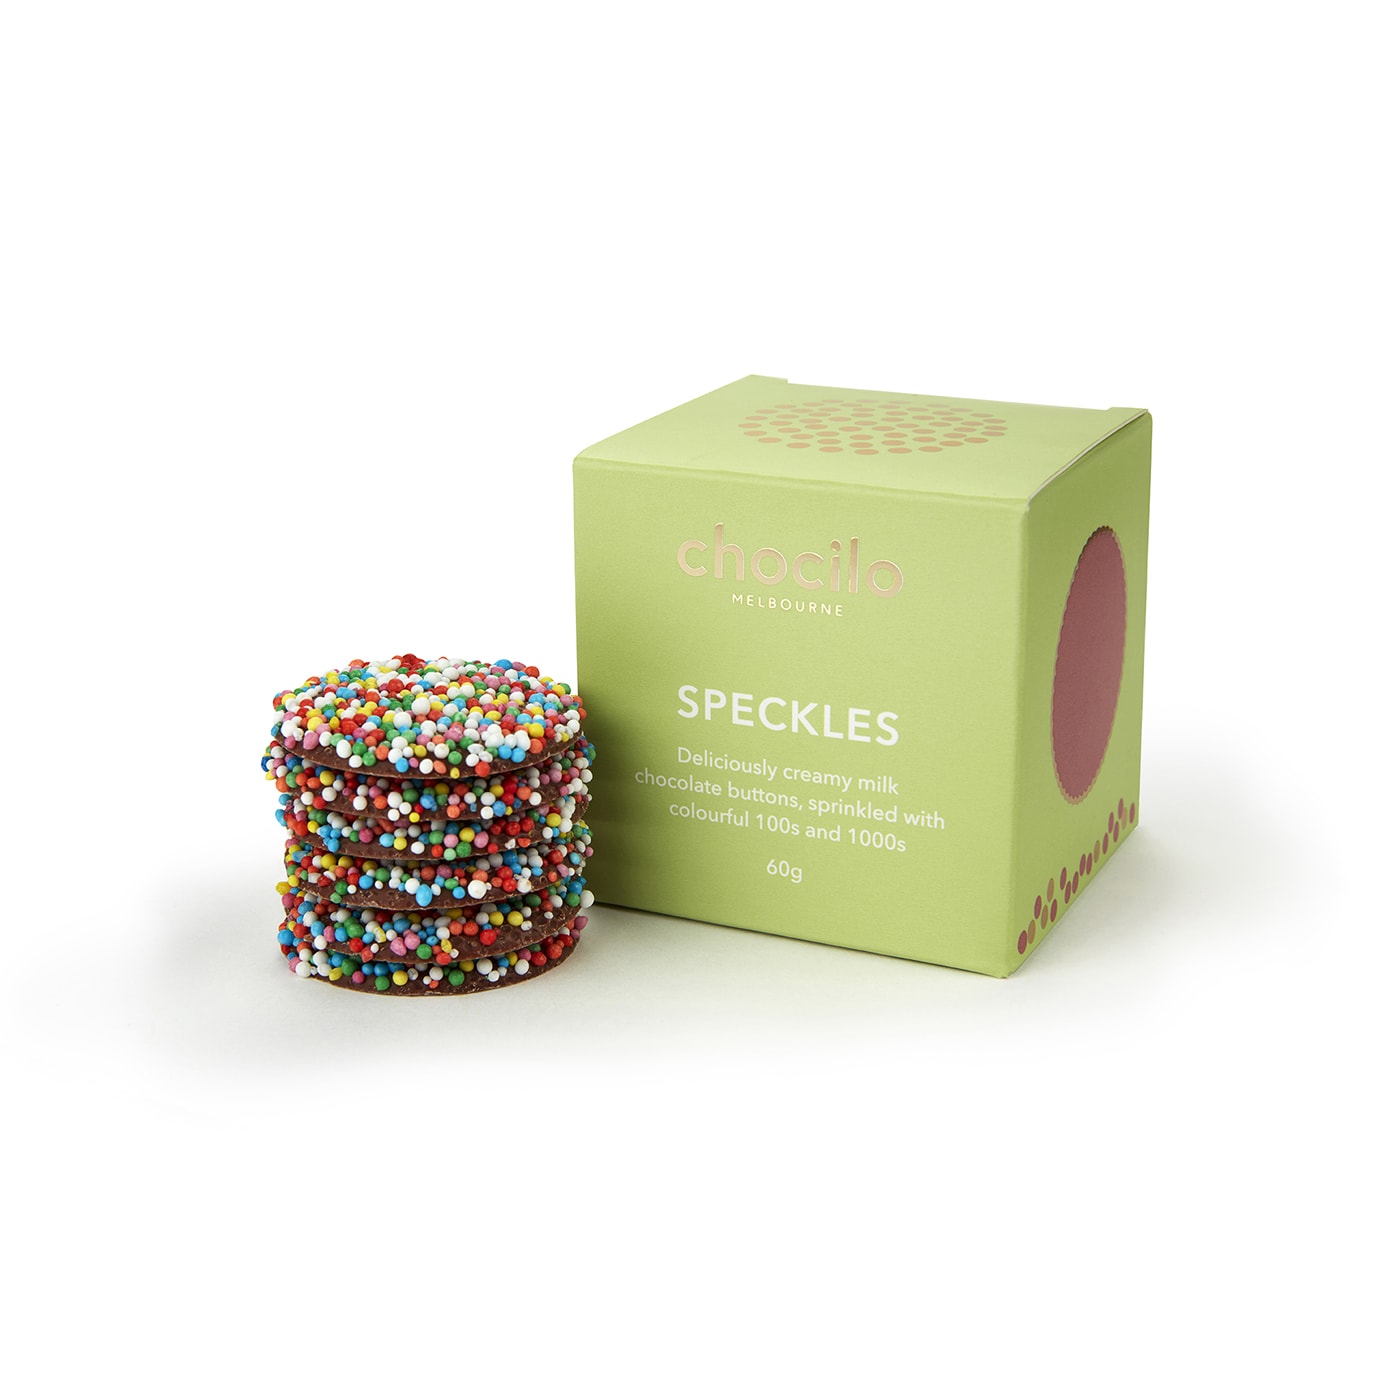 Chocilo Melbourne Milk Chocolate Speckles Gift Cube